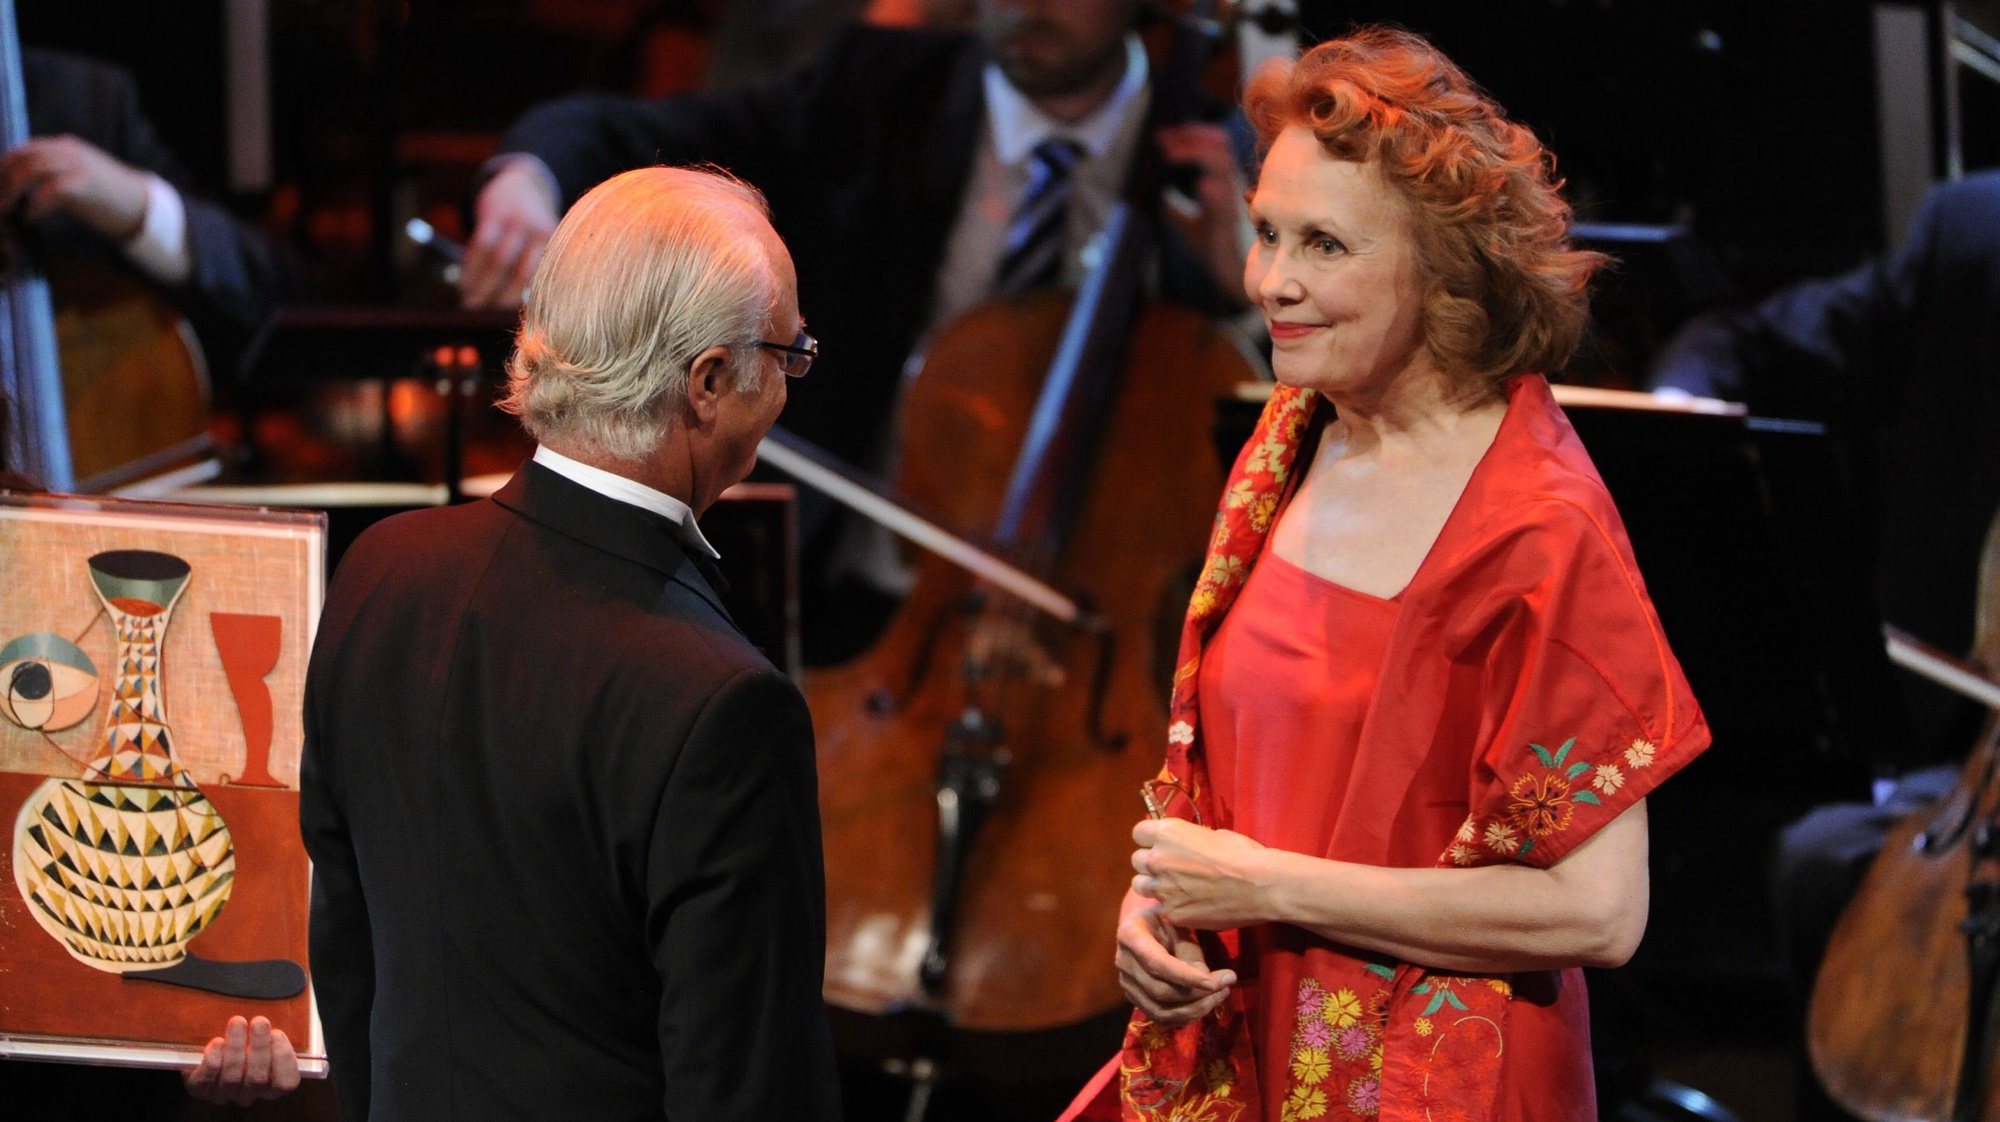 epa03839219 Laureate and Finnish composer Kaija Saariaho (R) receives her award from King Carl Gustaf on stage during Polar Music Prize 2013 cermony at the Concert Hall in Stockholm, Sweden, 27 August 2013.  EPA/ERIK MARTENSSON / SCANPIX  SWEDEN OUT